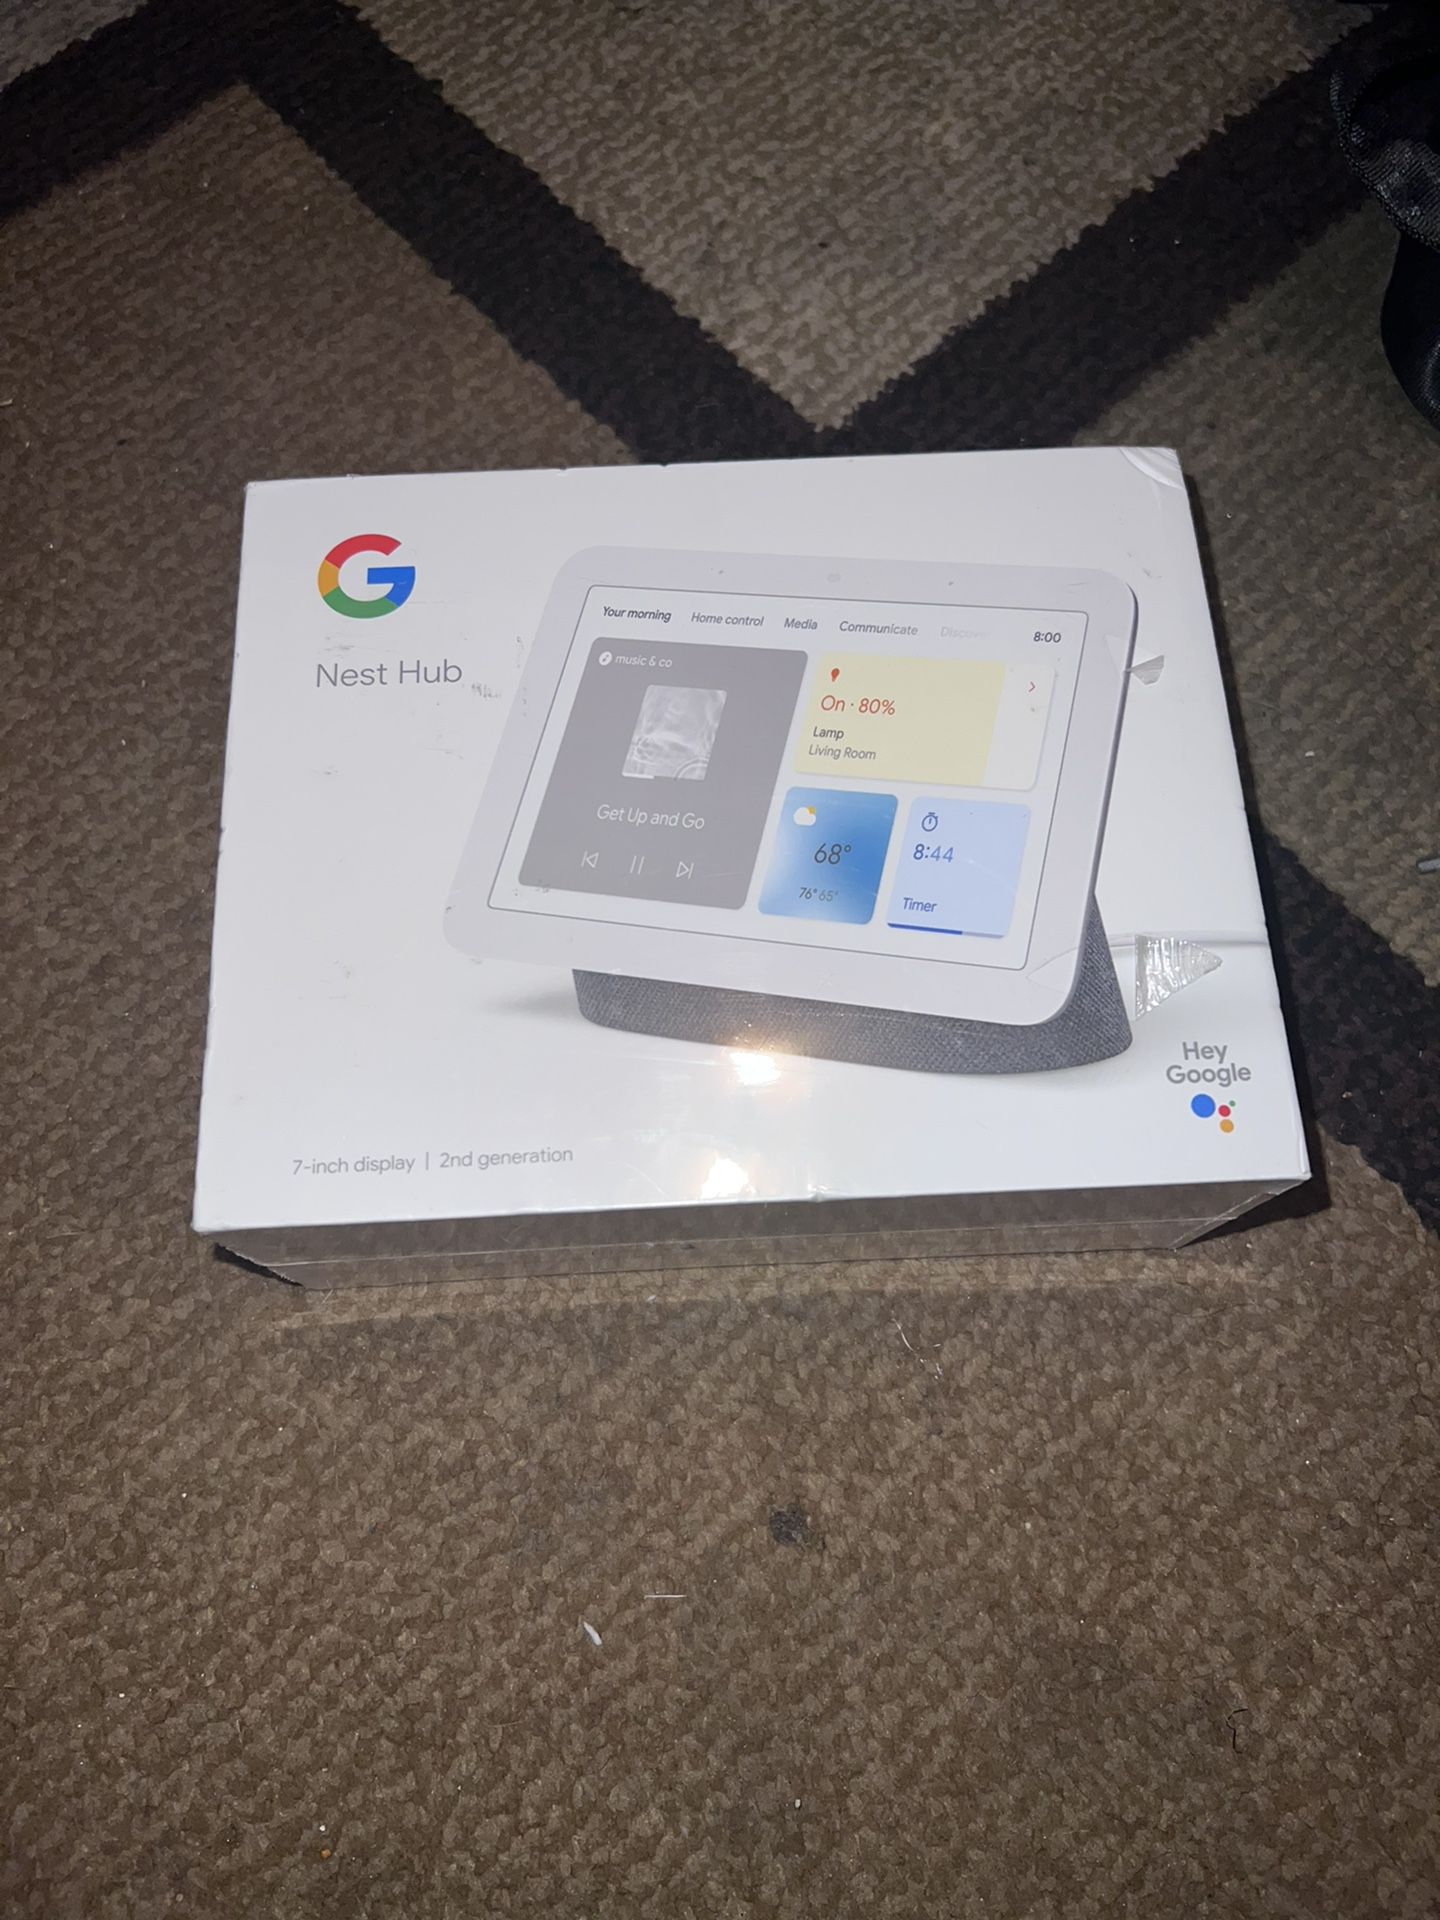 Google Home nest second generation brand new never opened box Asking $50 It Retails For $100